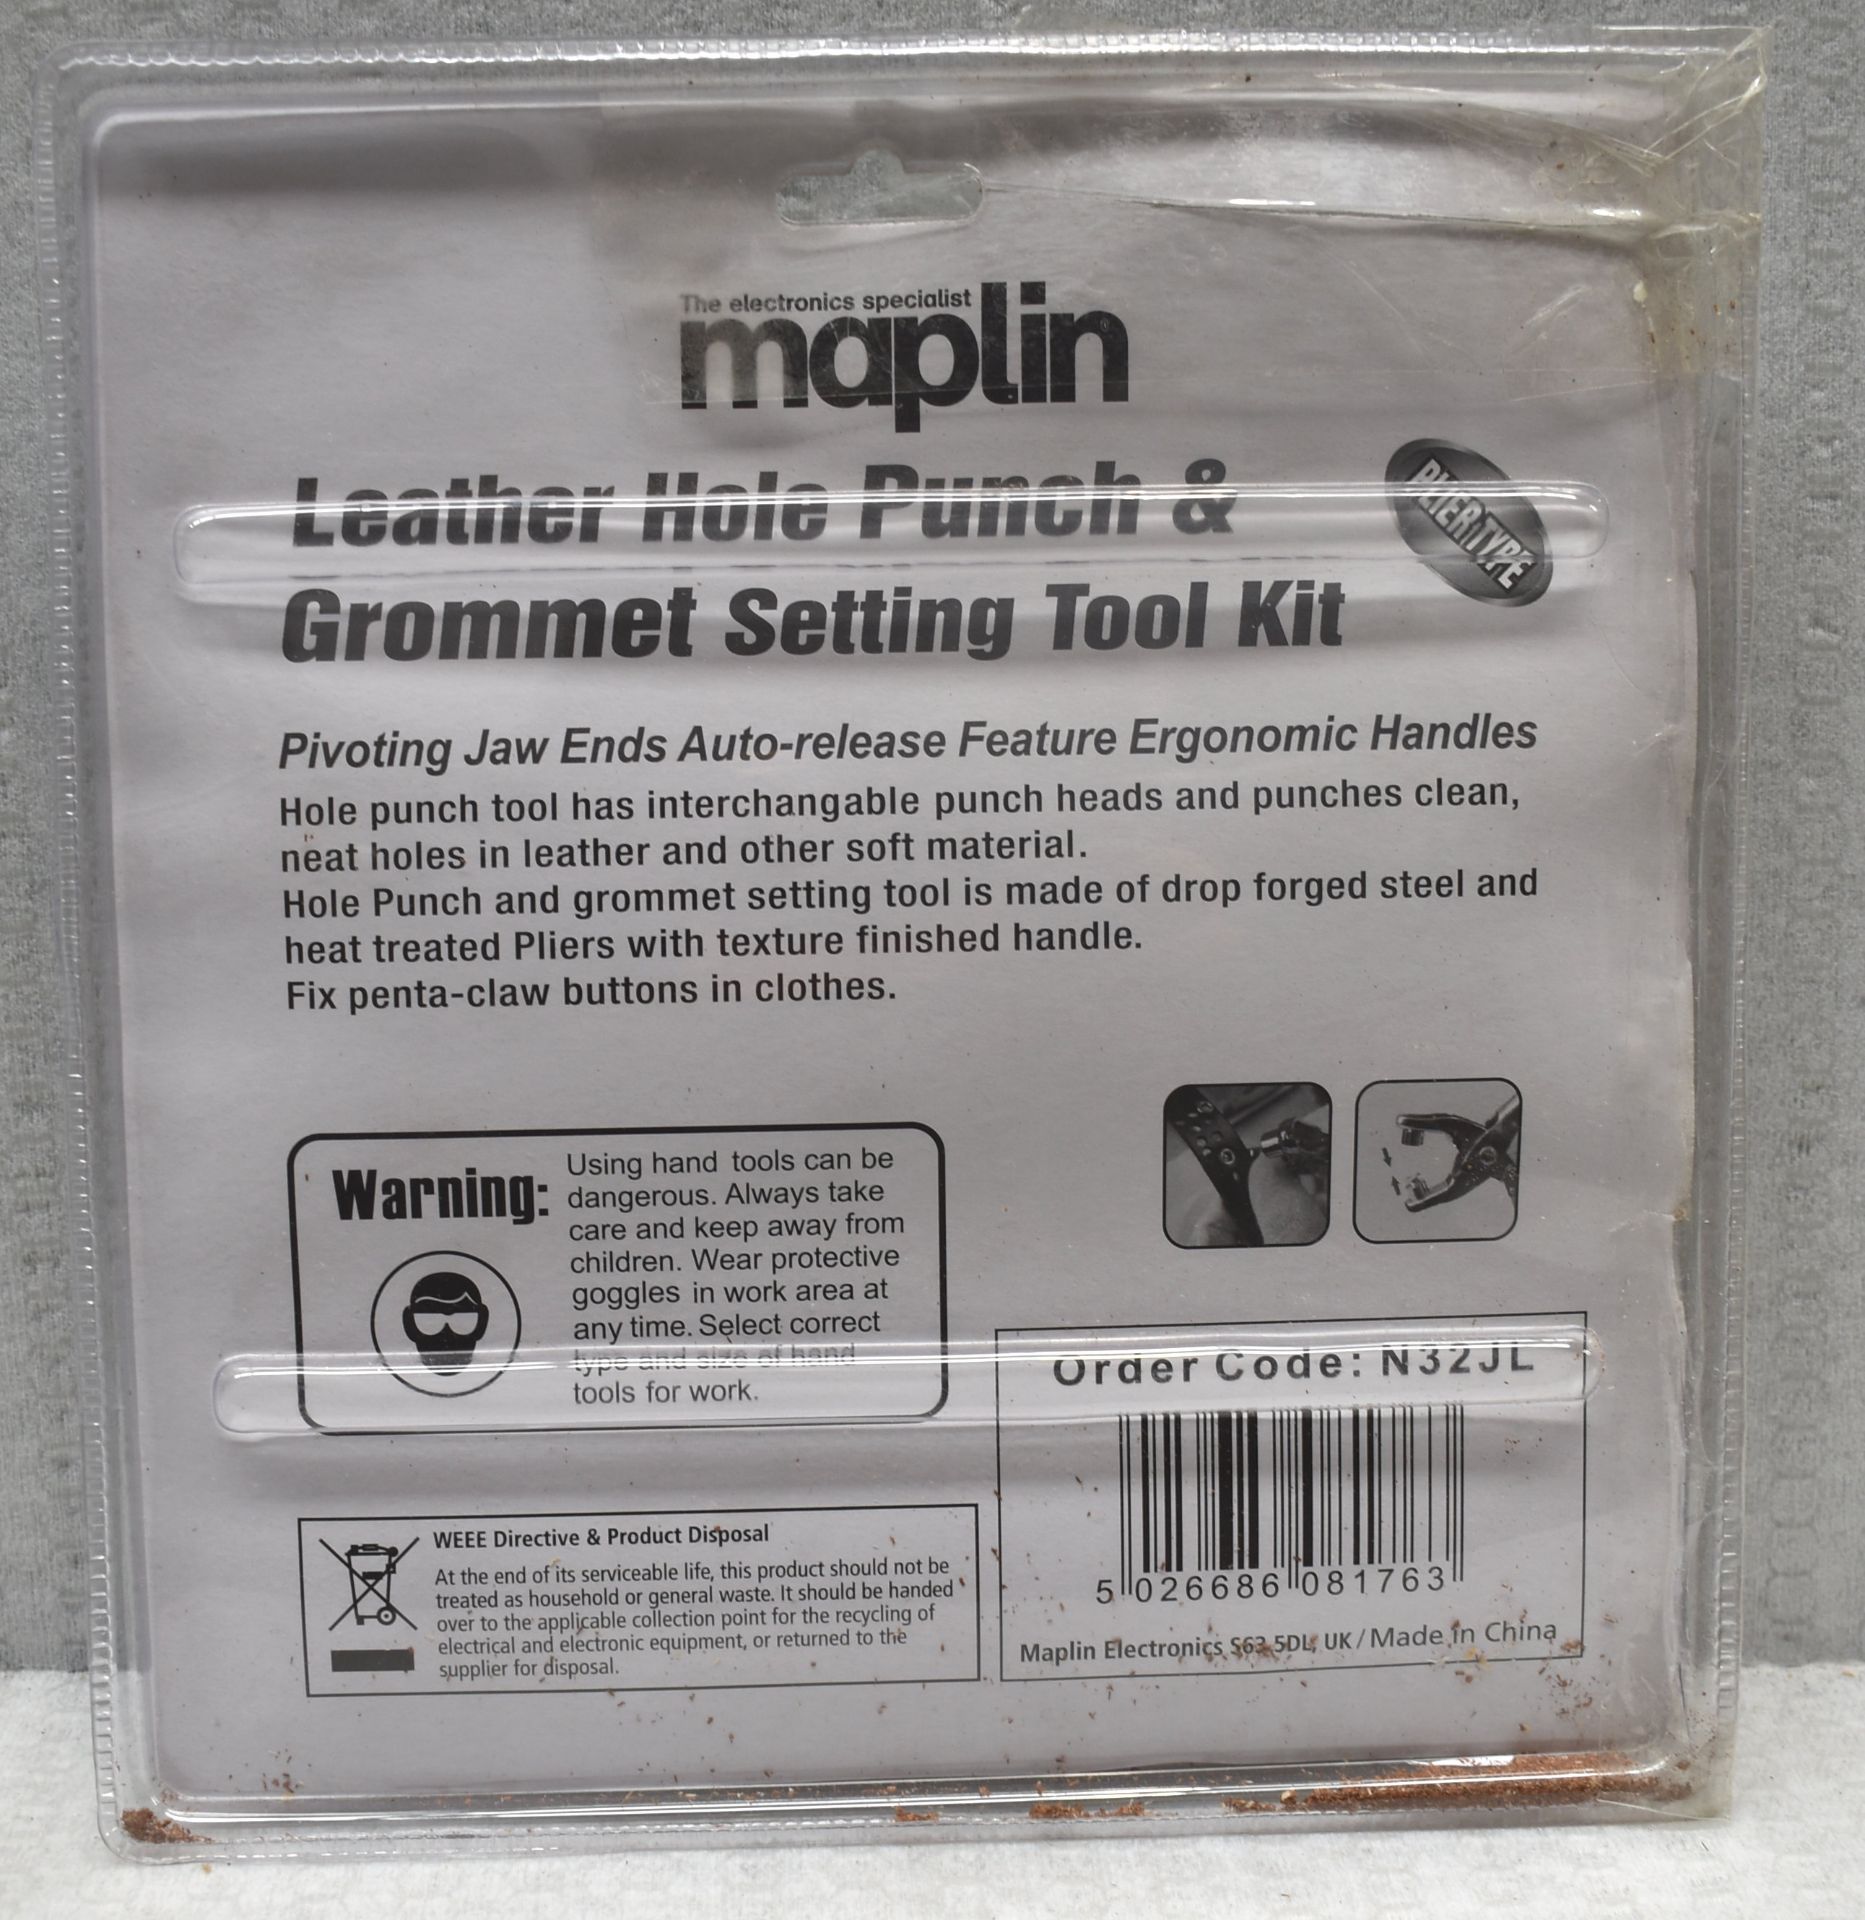 1 x MAPLIN Leather Hole Punch & Grommet Setting Tool Kit - Ref: K250 - CL905 - Location: Altrincham - Image 6 of 7